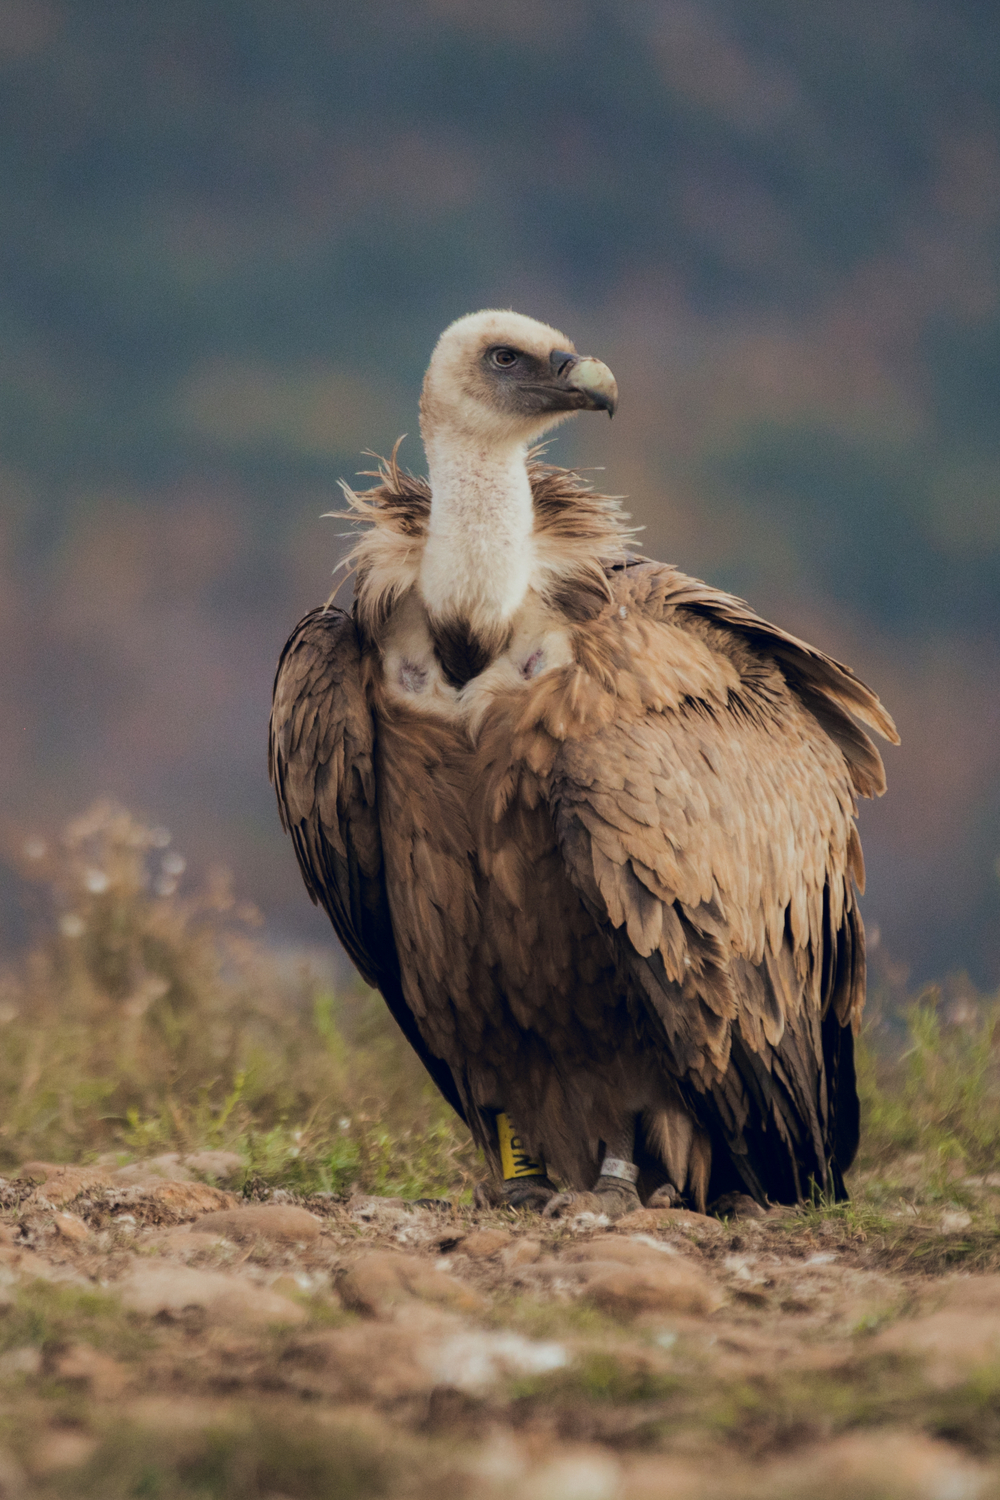 Meanings of Vulture Encounters